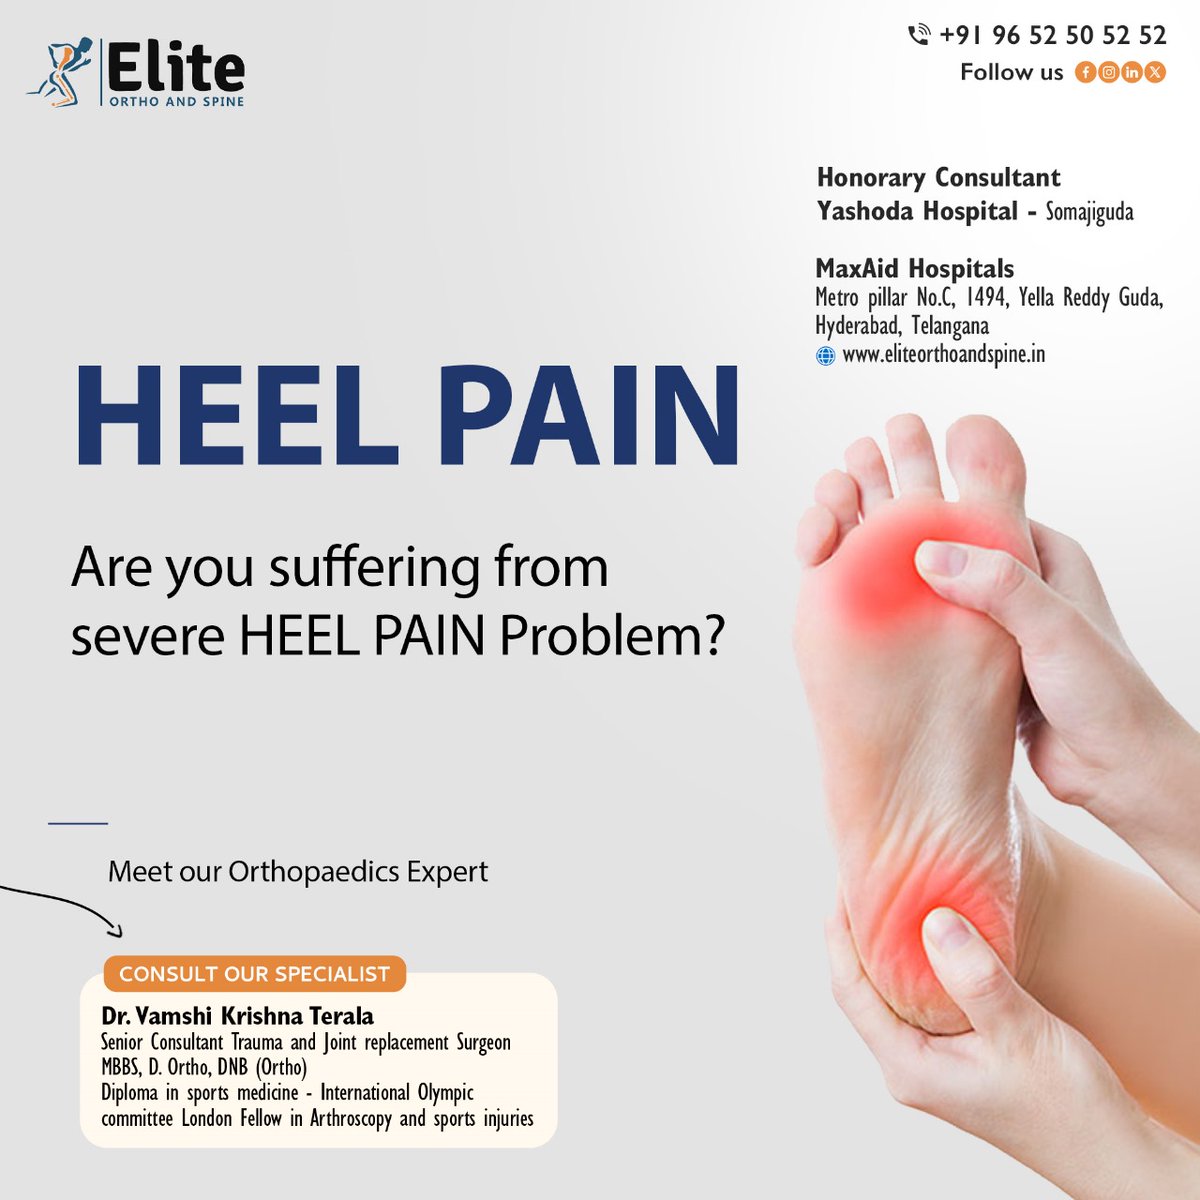 🦶 Experiencing severe heel pain? We've got the expertise to diagnose and treat your discomfort. Rediscover the joy of walking without pain! 👣💙

#EliteOrthoAndSpine #HeelPainRelief #FootHealth #OrthopedicCare #HeelPainSolutions #WalkPainFree #EliteOrthoCare #HappyFeet